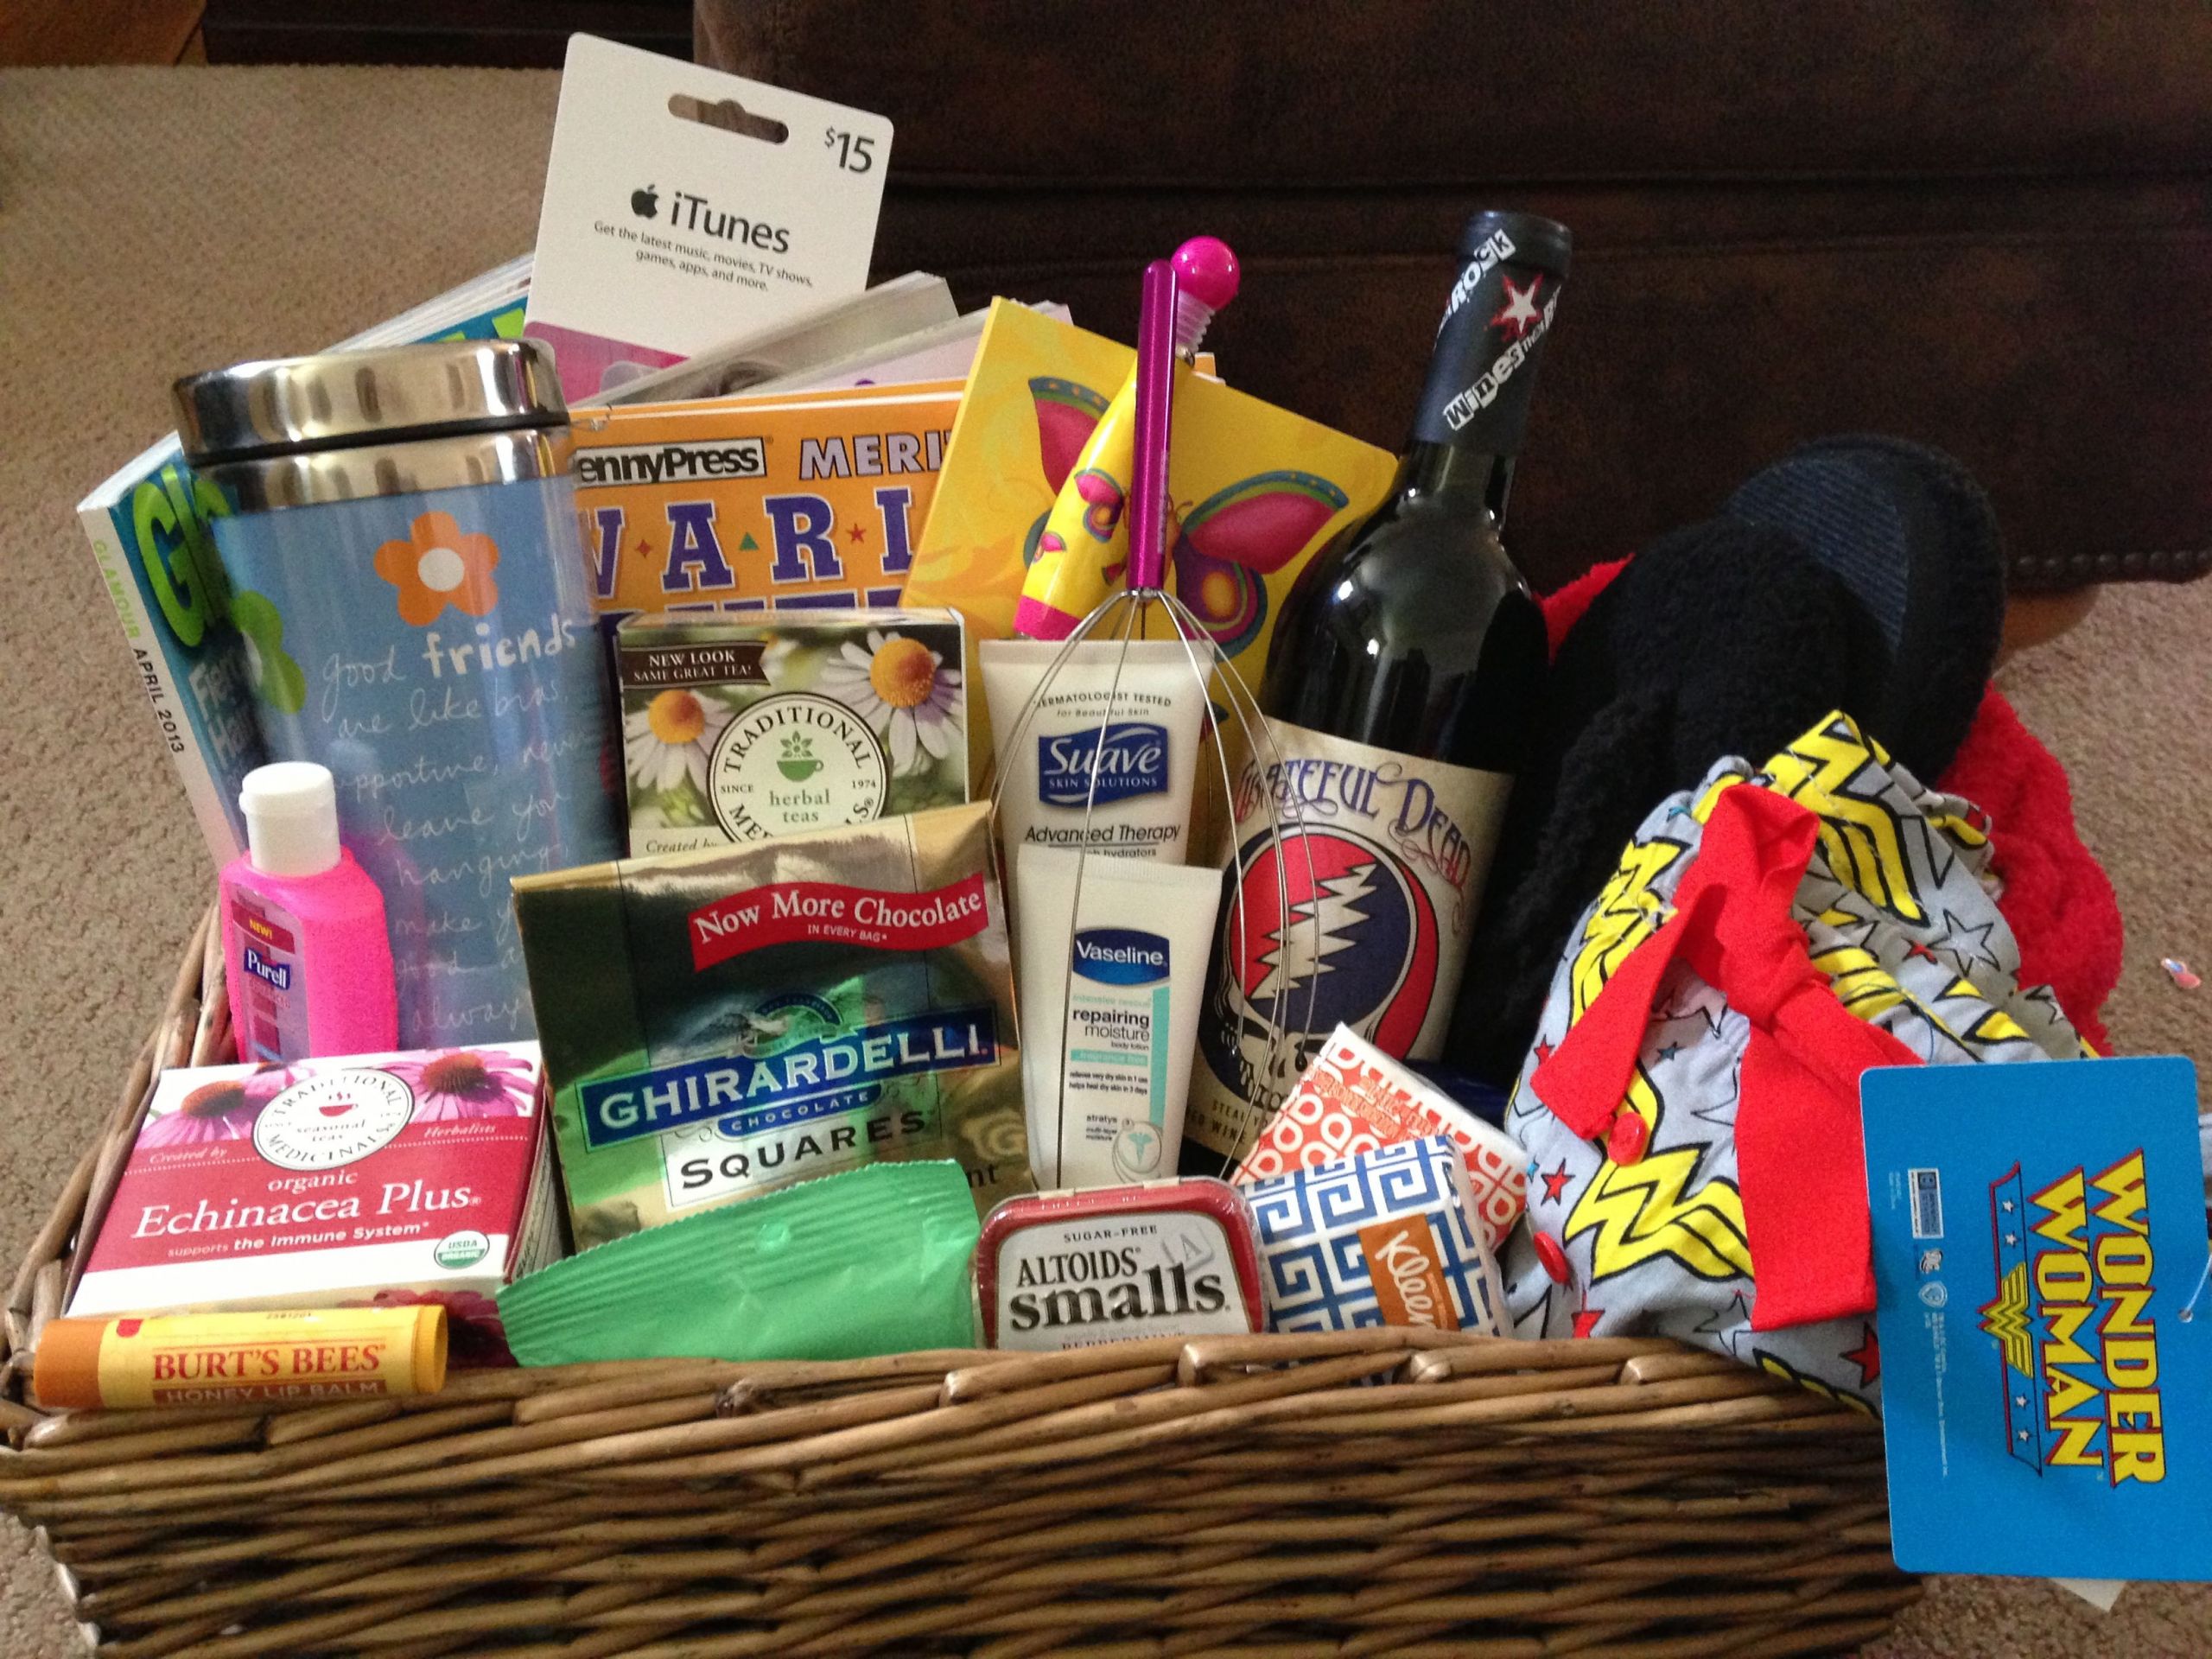 Get Well Gift Basket Ideas Surgery
 Basket for awesome friend after surgery